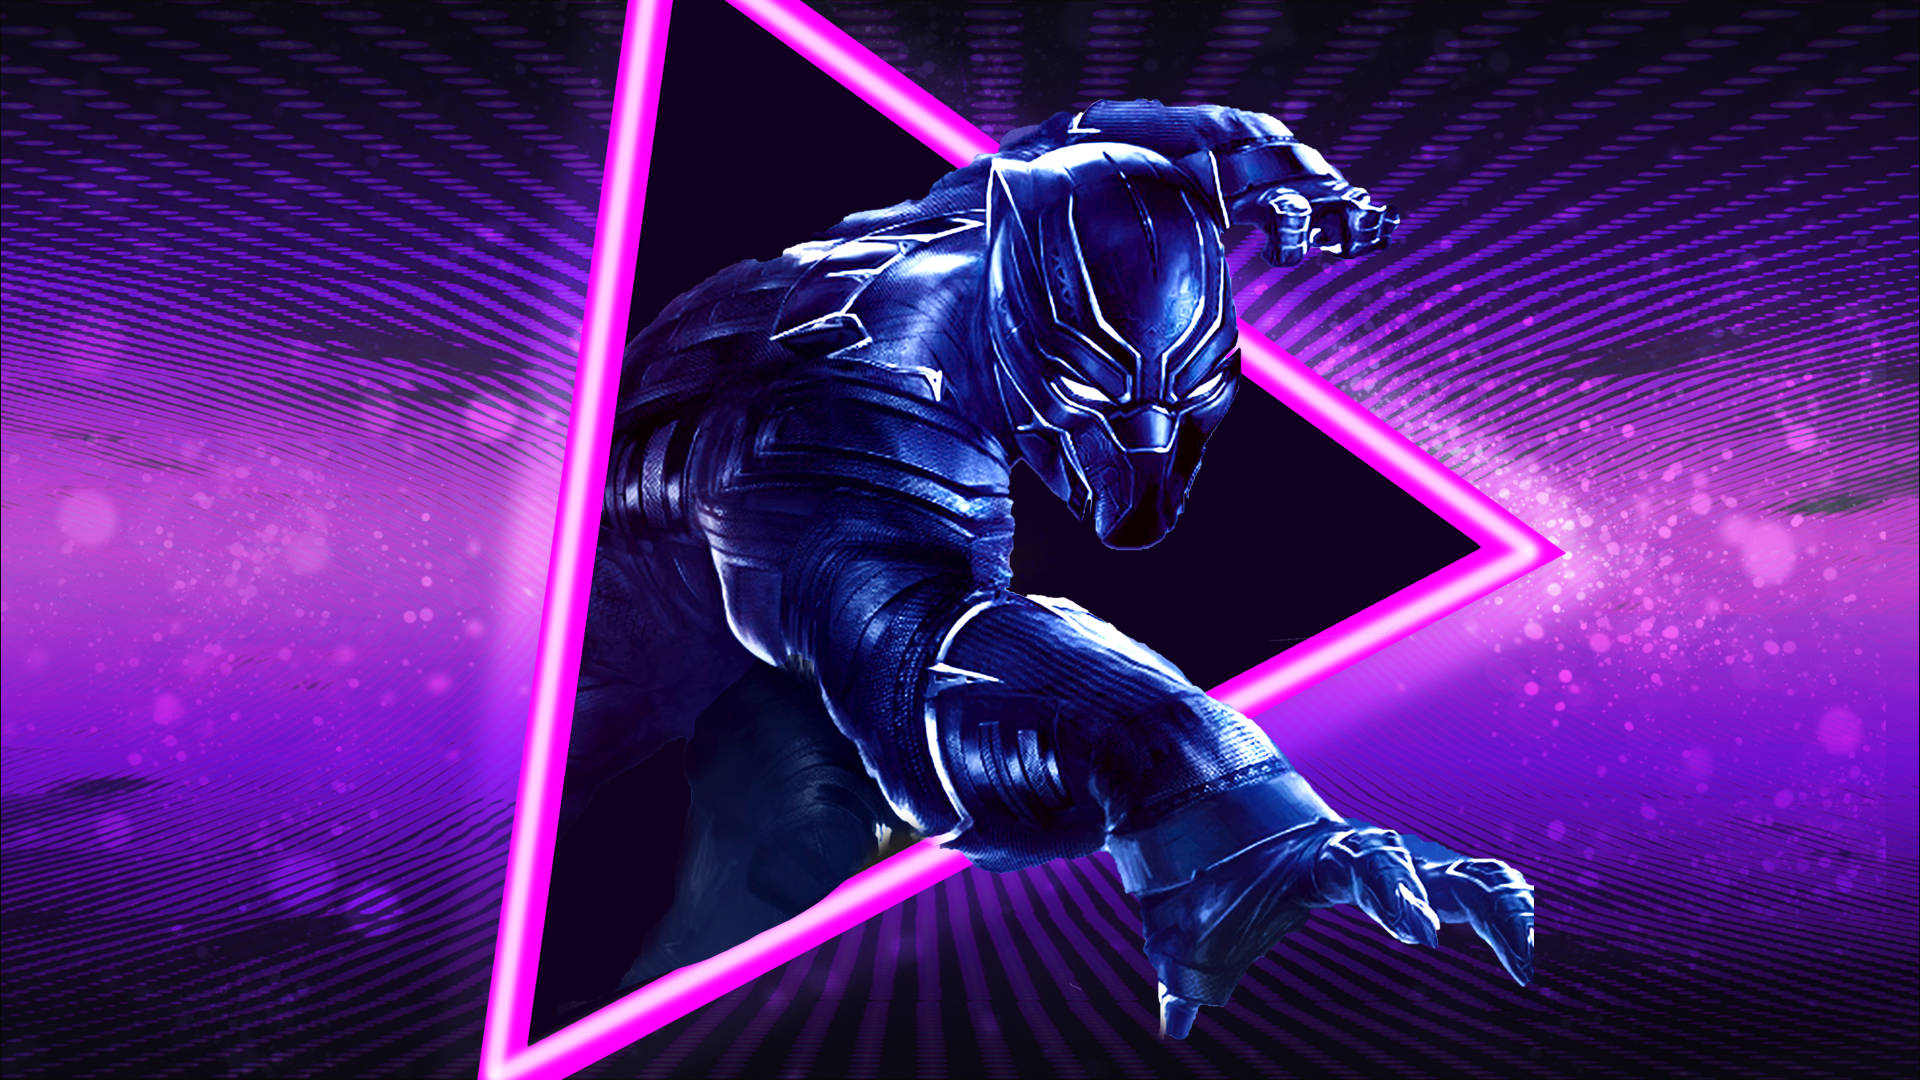 Black Panther In Purple Hue Background